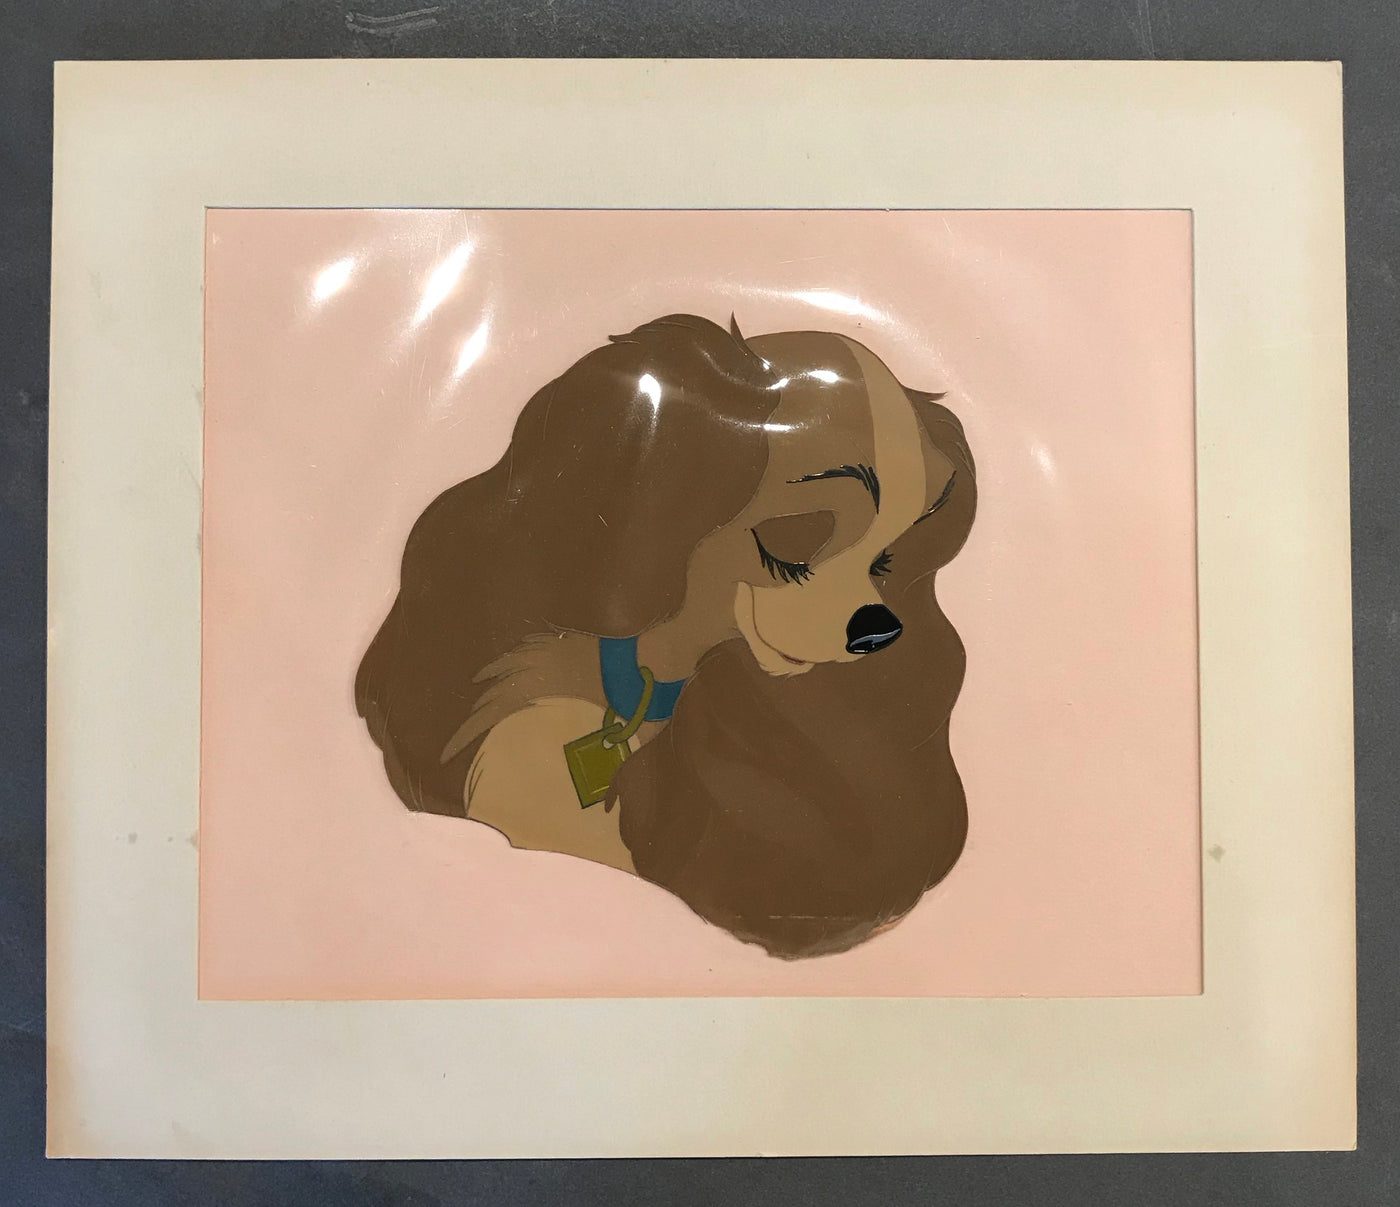 Original Walt Disney Production Cel from Lady and the Tramp featuring Lady